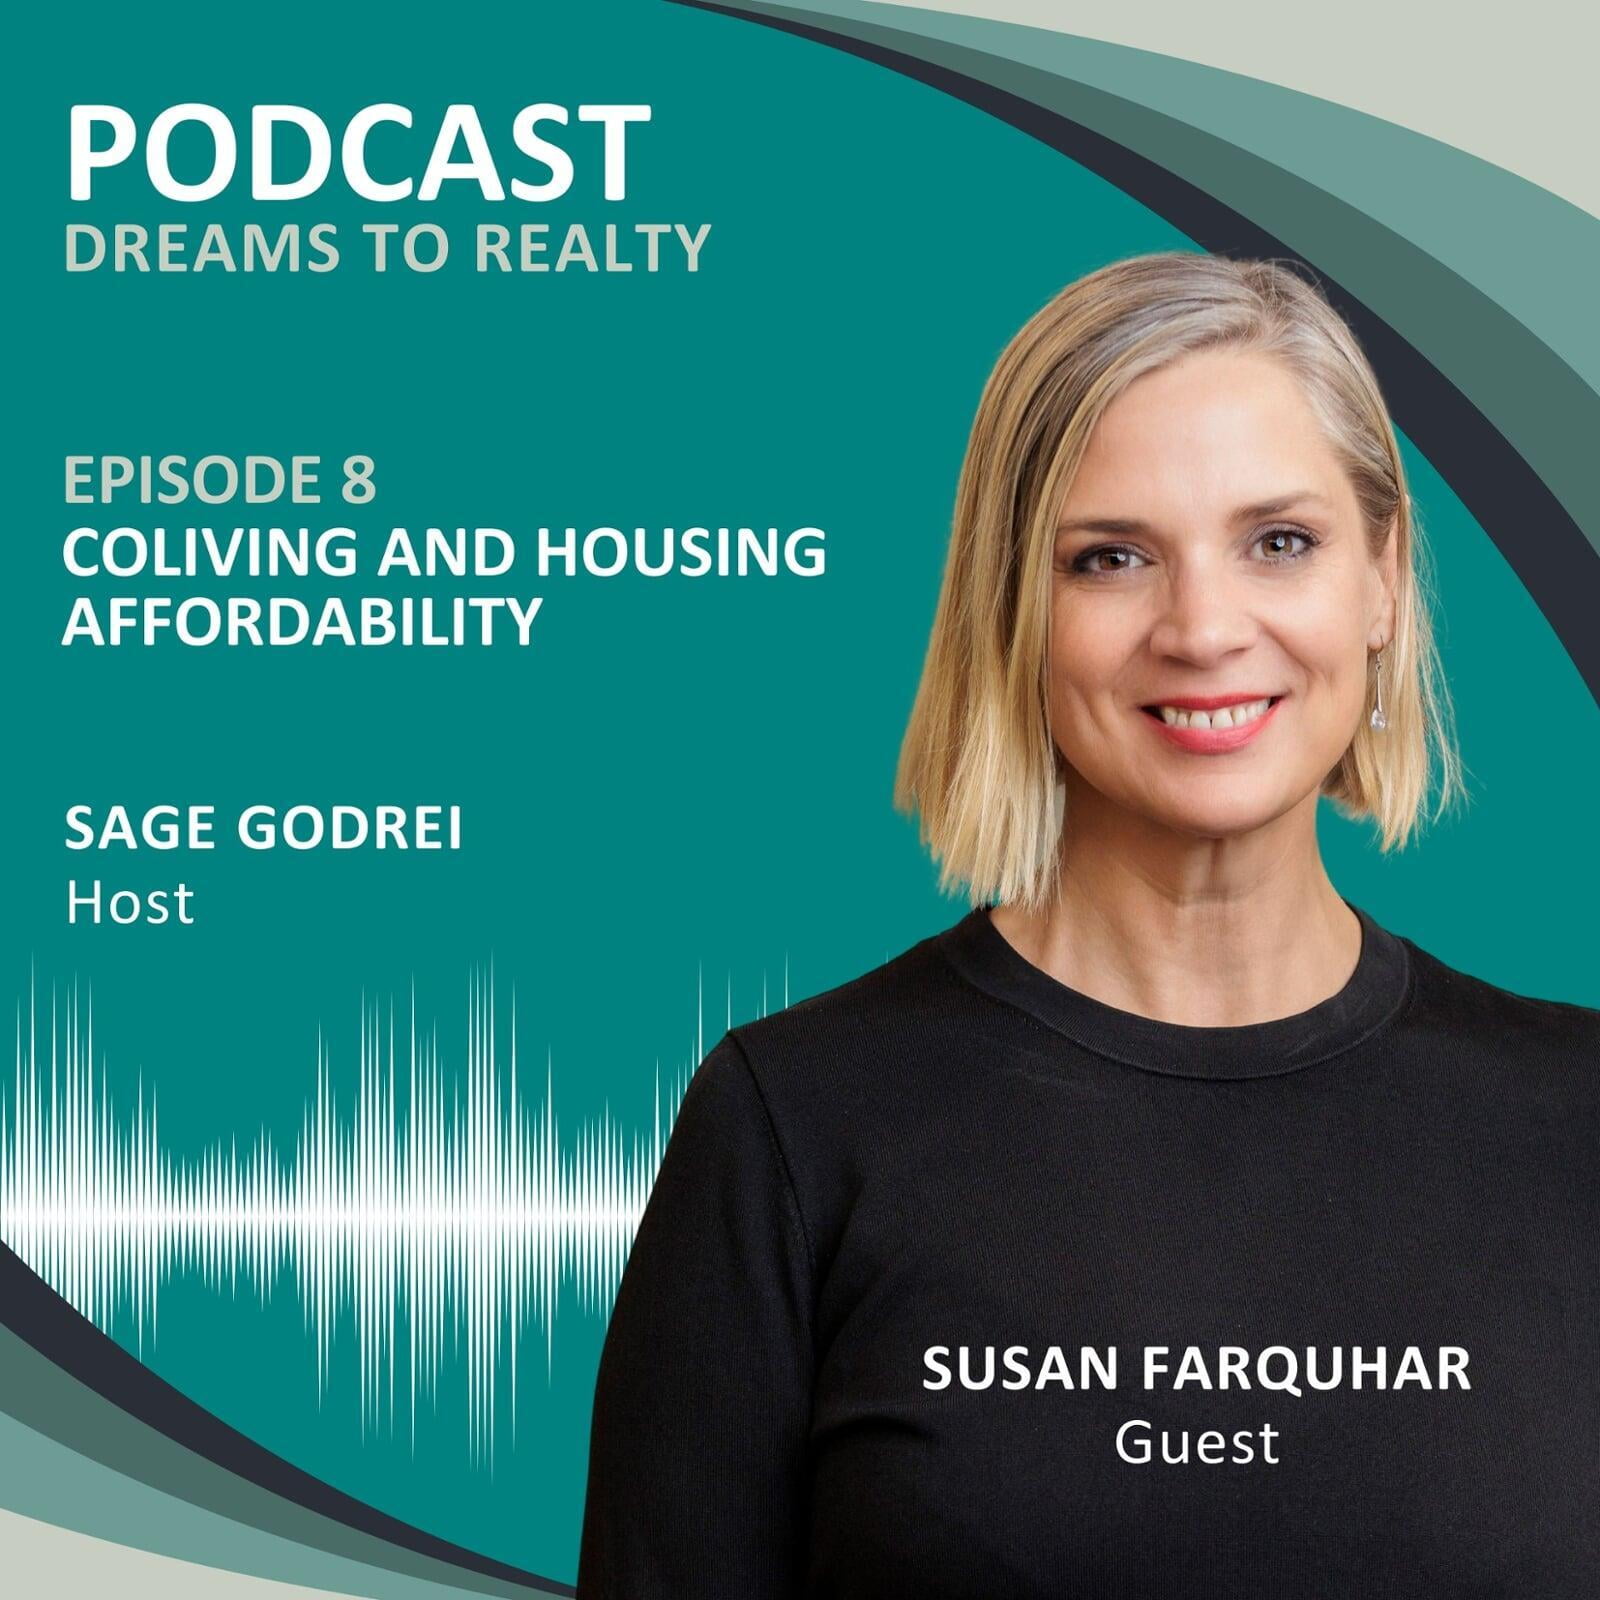 PODCAST: Dreams To Realty Property Investment Insights - Episode 8 Co-Living And Housing Affordability